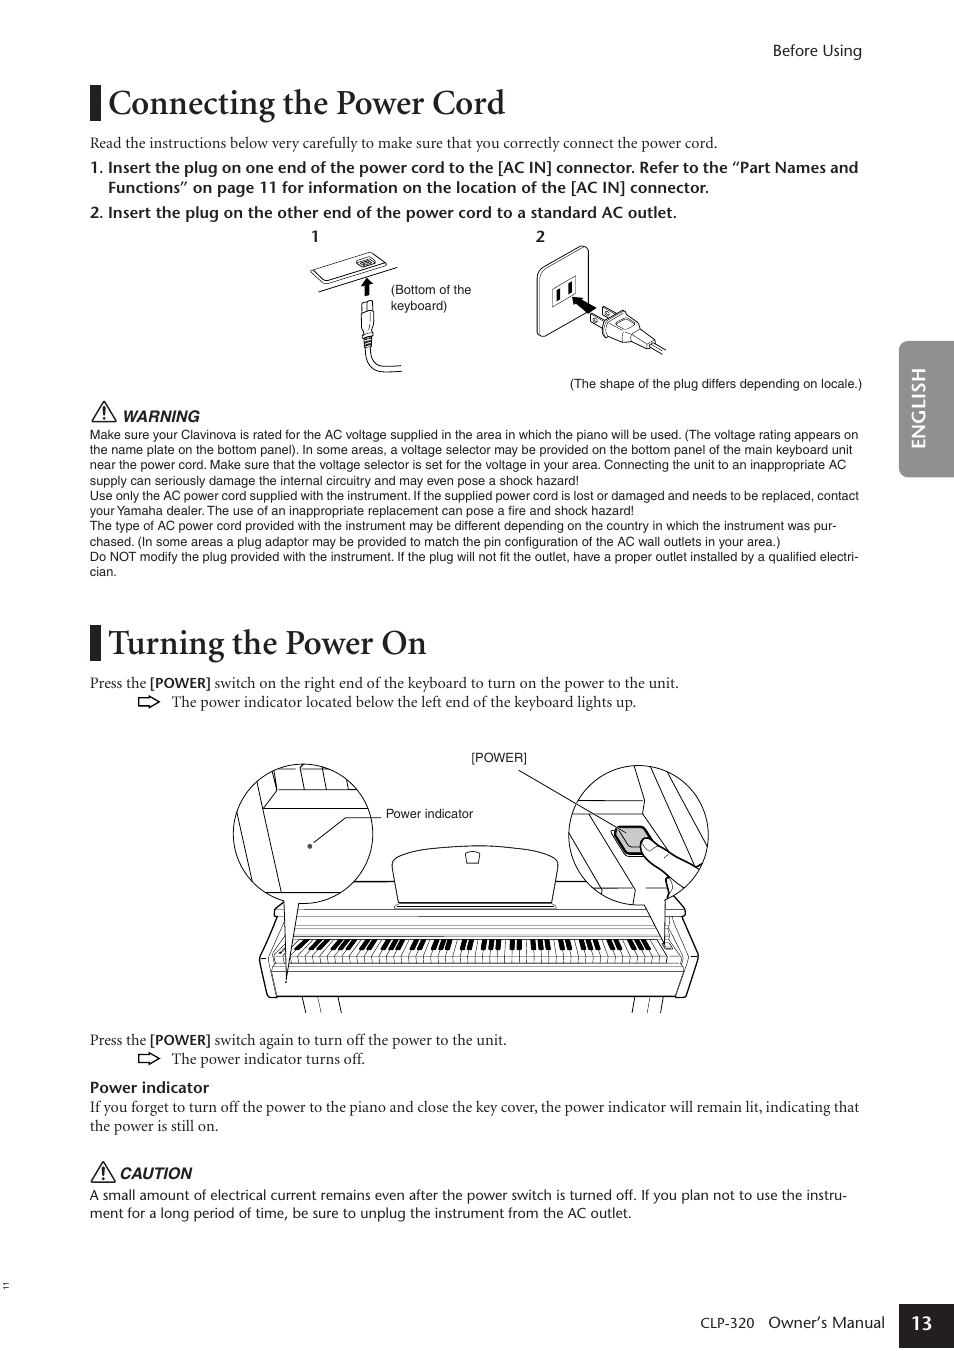 Connecting the power cord, Turning the power on | Yamaha Clavinova CLP-320  User Manual | Page 13 / 44